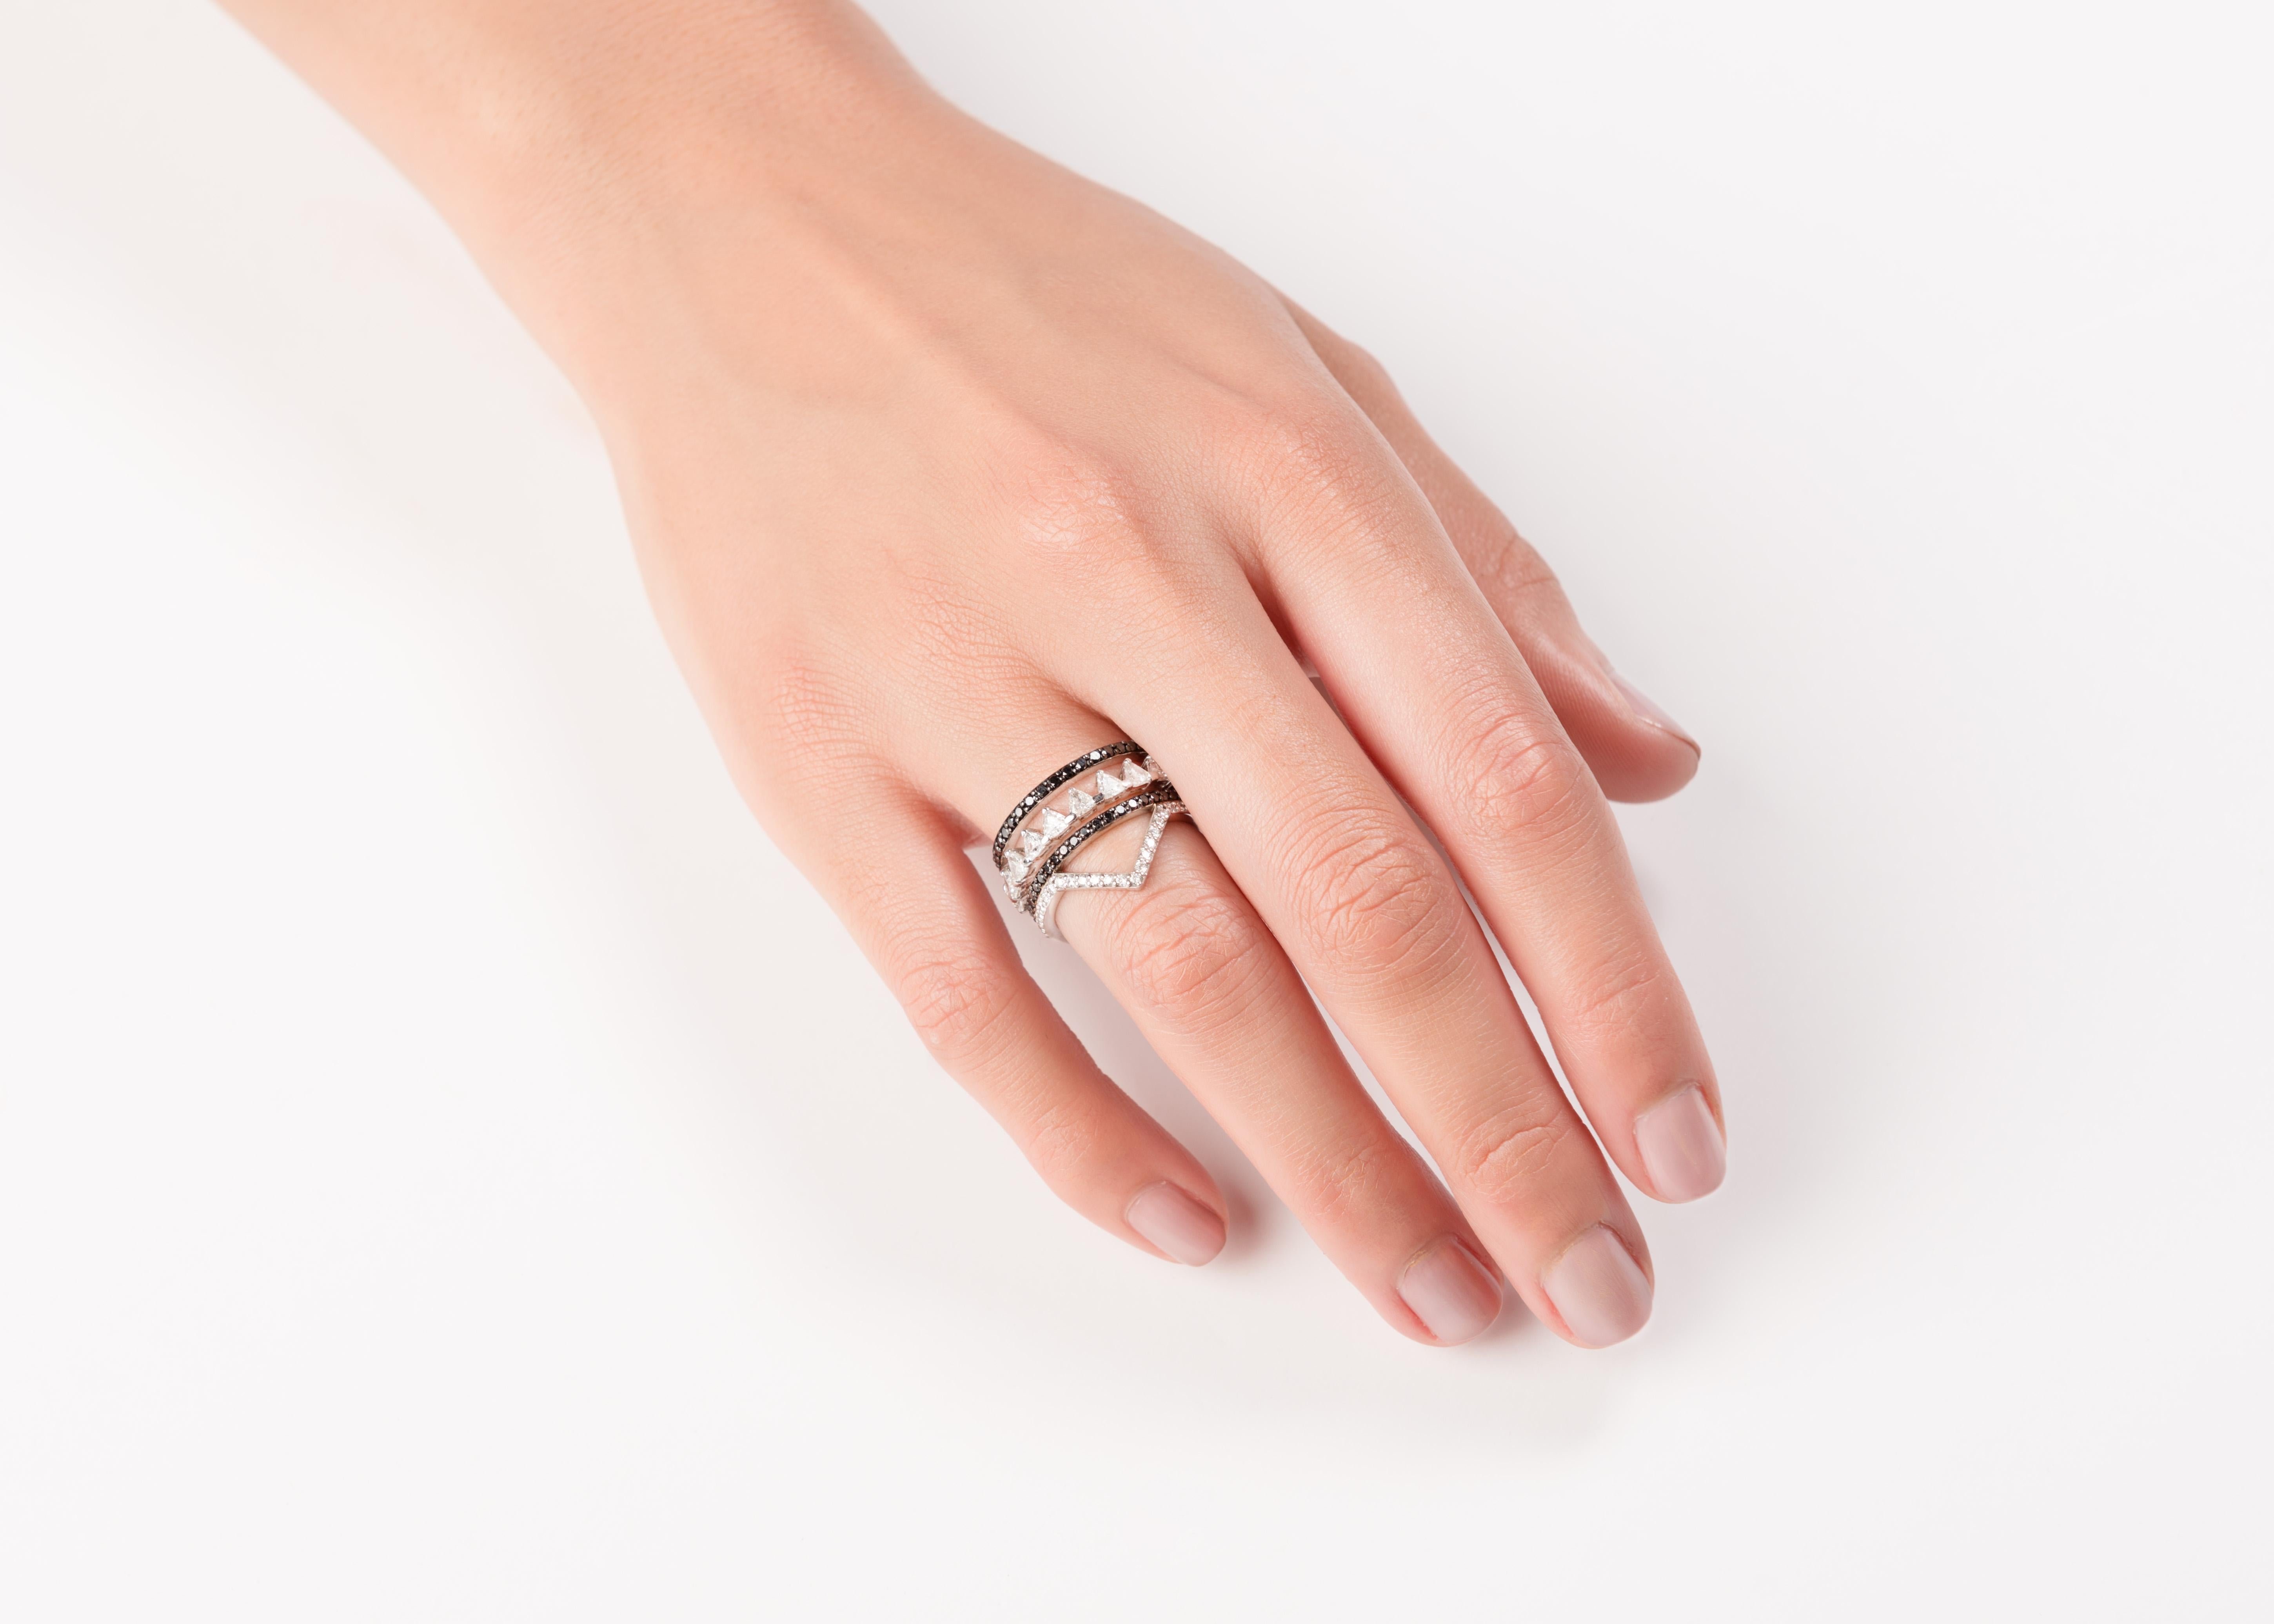 Add a royal touch to your everyday routine with our classy and spectacular crown-inspired gold ring. Hand-crafted to a standard on perfection, the Amara piece presents an organic silhouette, featuring a tripe stack of entwined bands, carefully